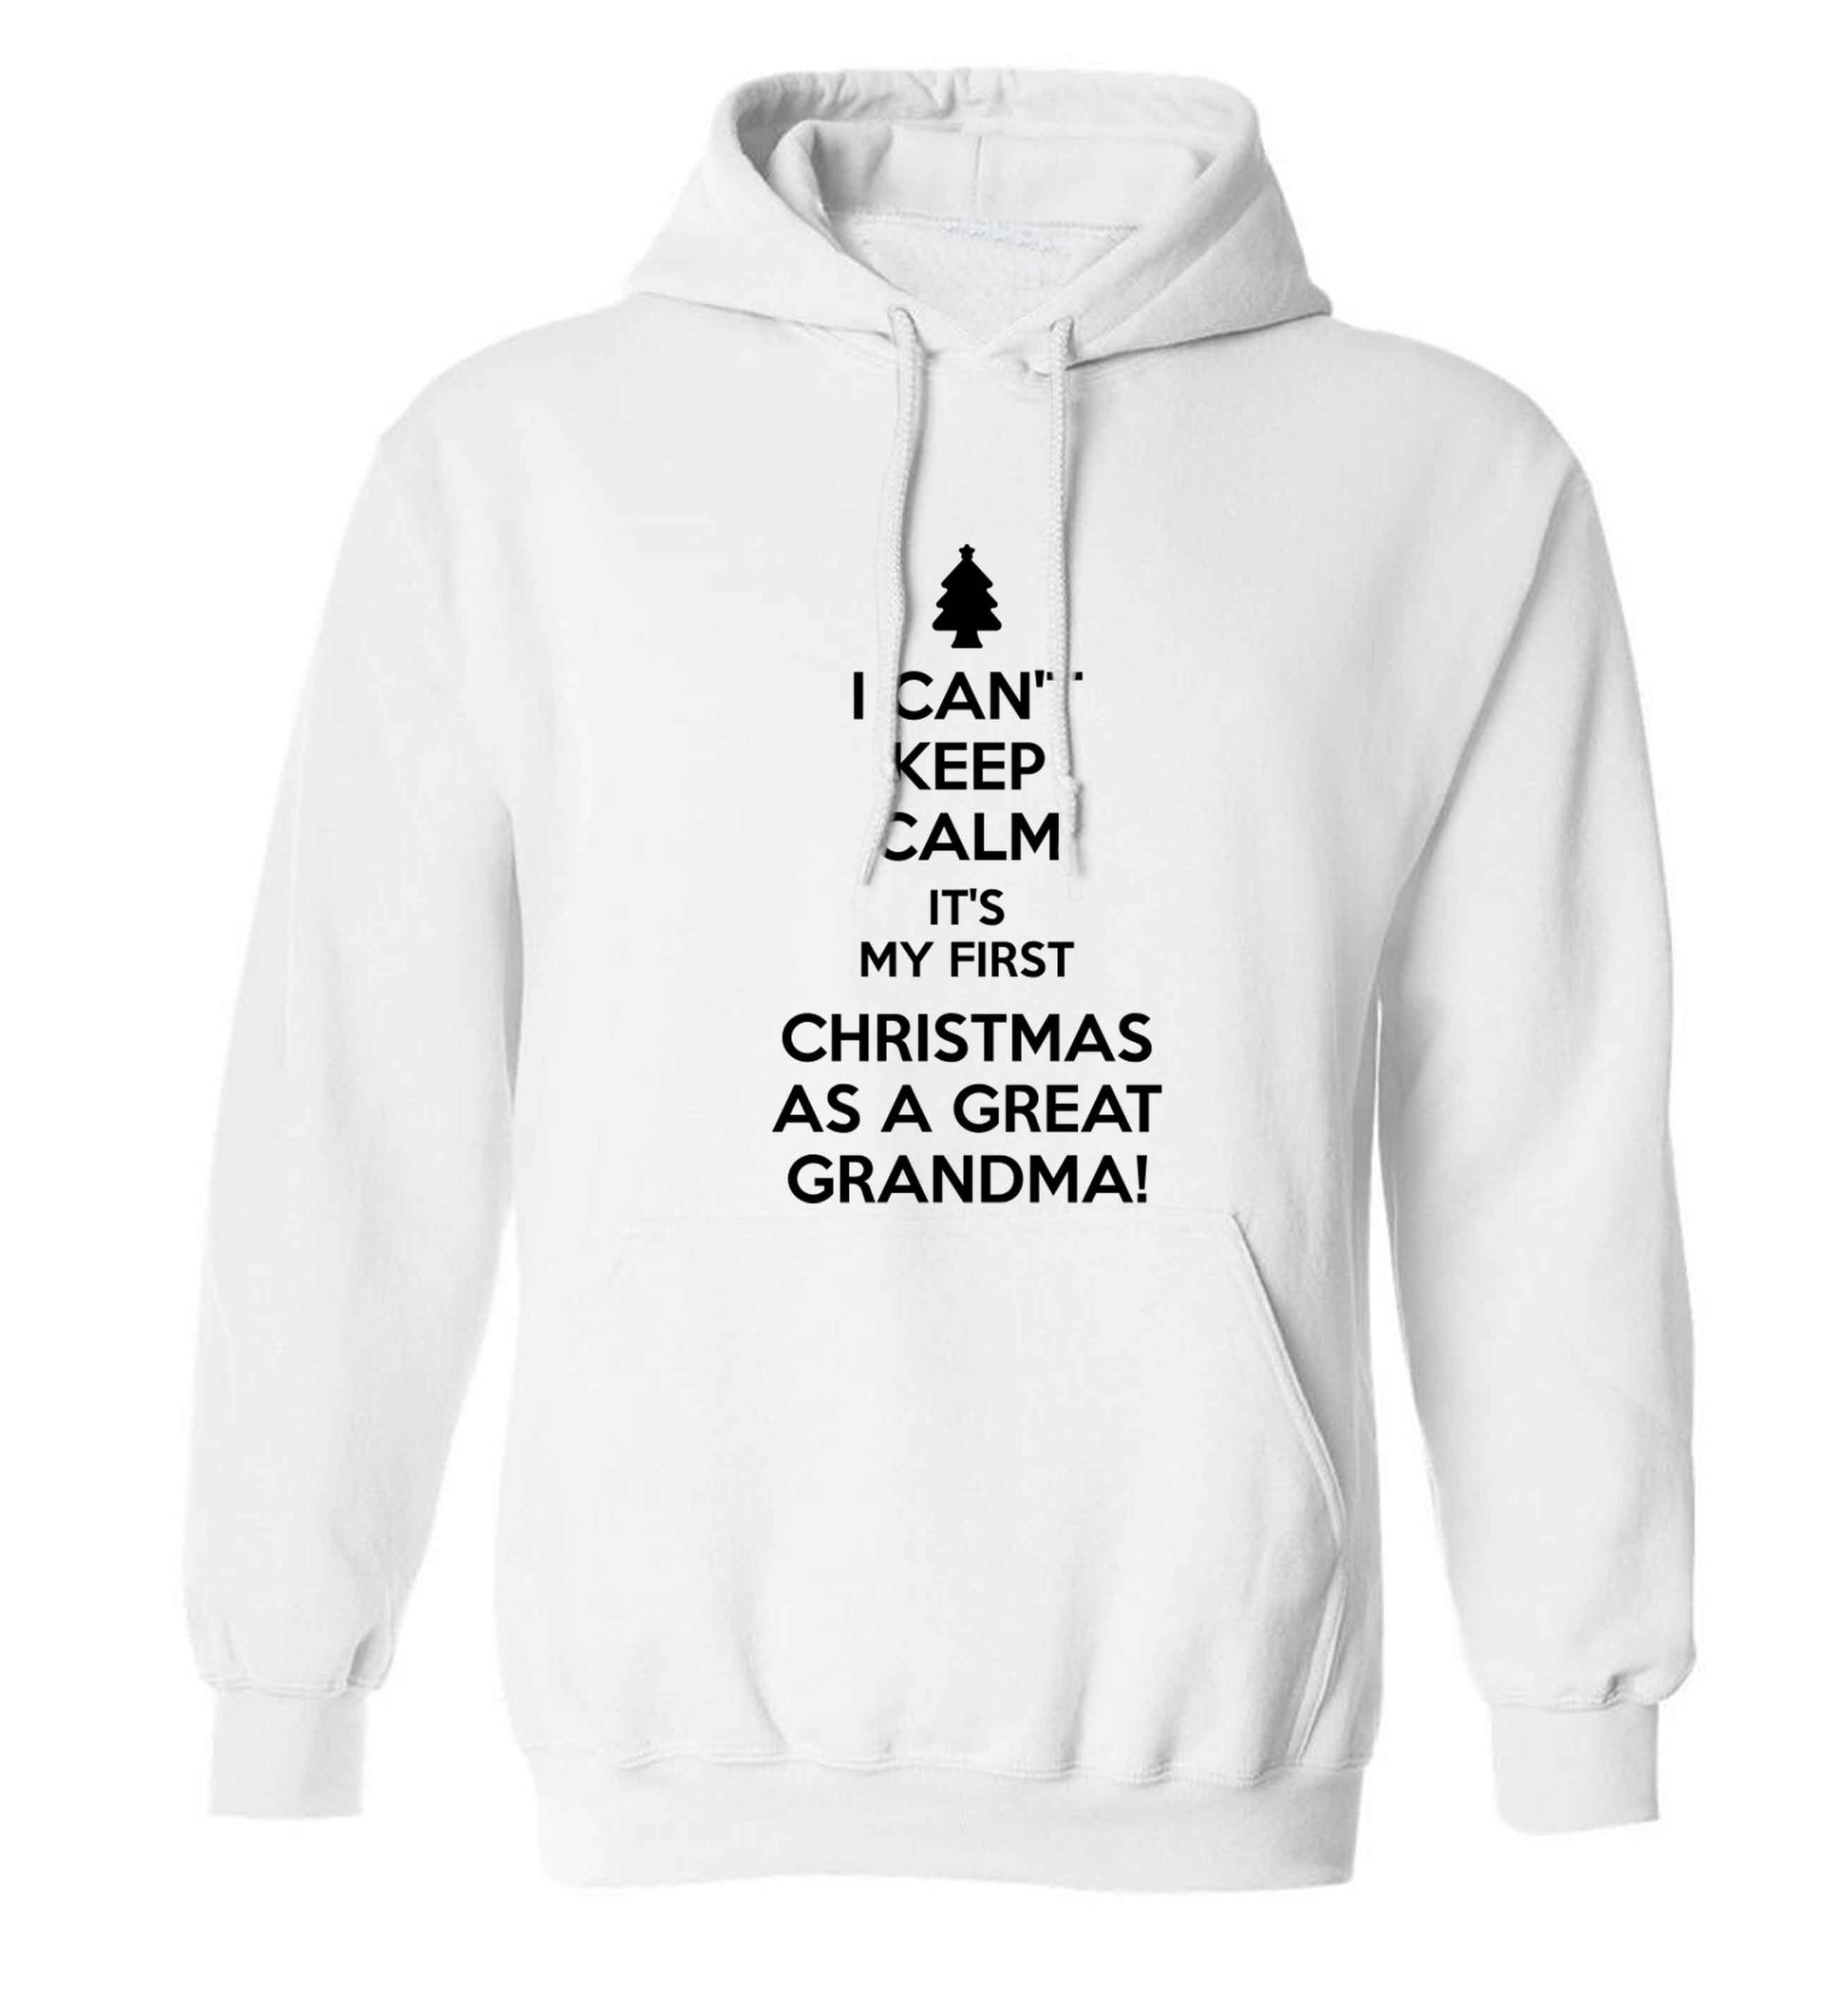 I can't keep calm it's my first Christmas as a great grandma! adults unisex white hoodie 2XL